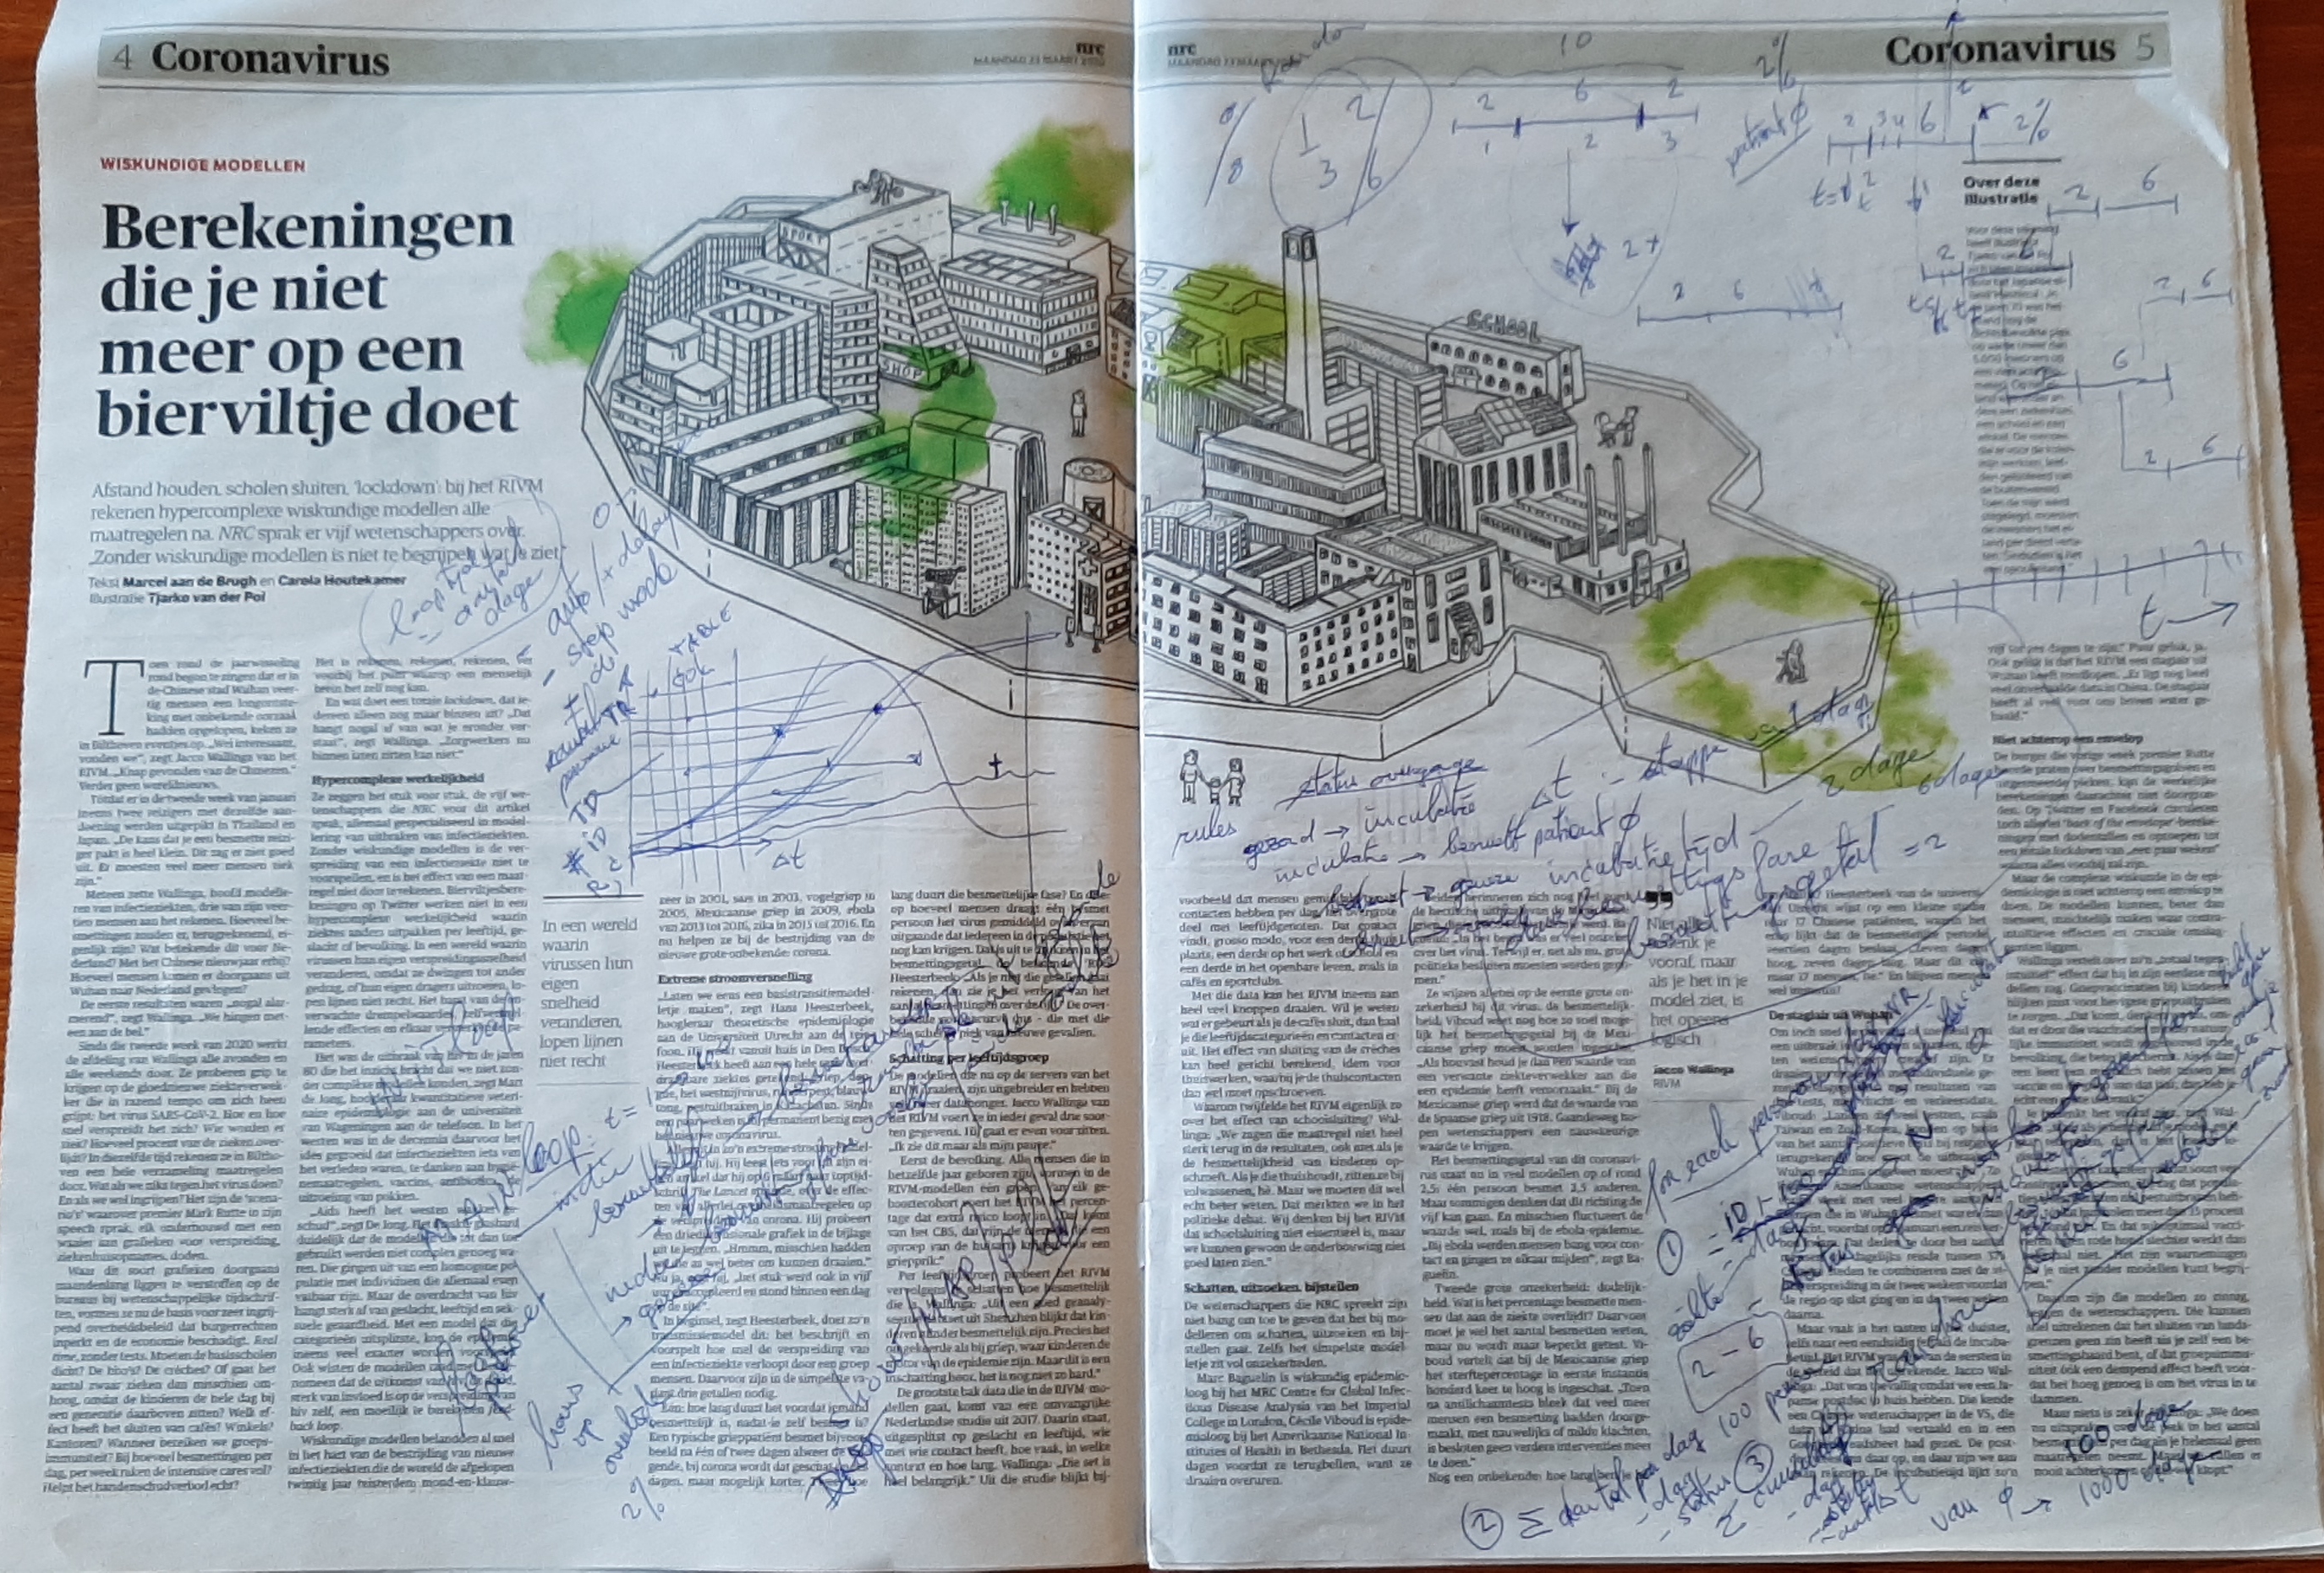 Article in the NRC Next paper of 23rd March 2020 with my scribbles.